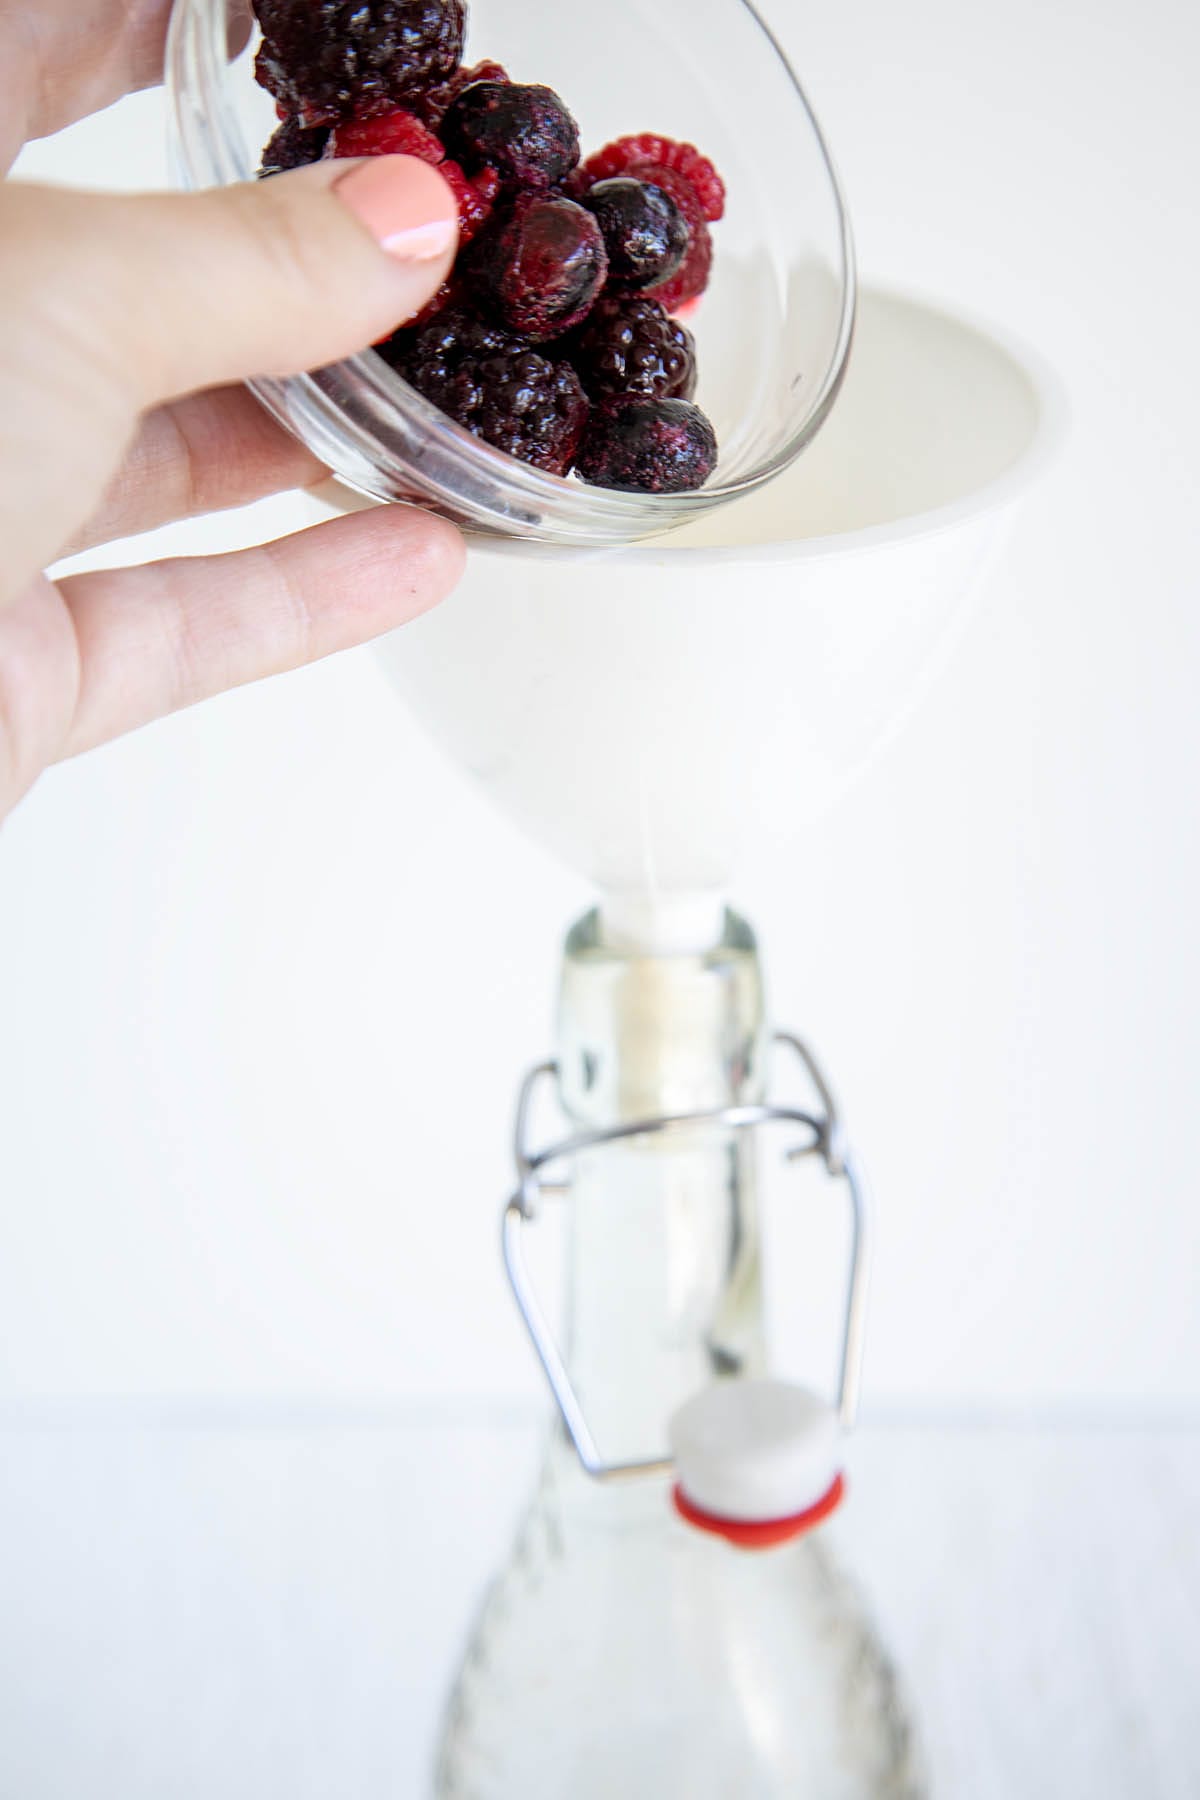 Mixed berries being poured into a funnel into a bottle.